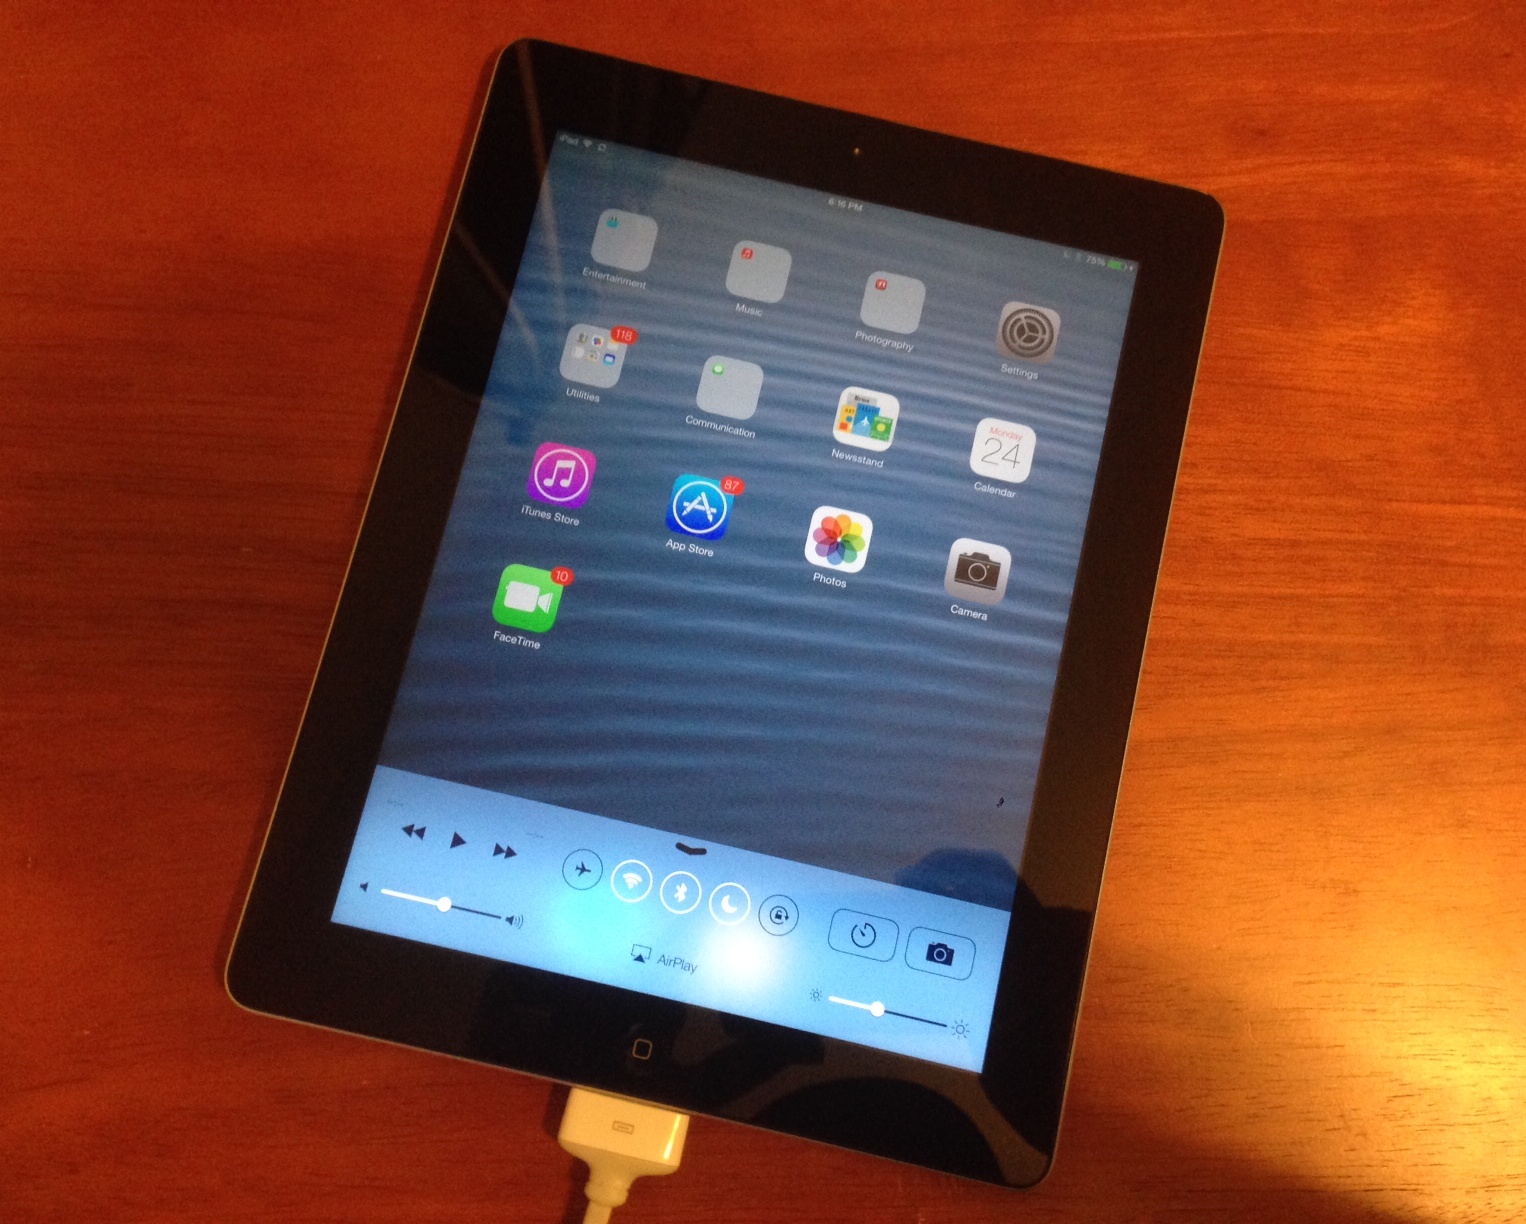 The iPad iOS 7 Beta is now available.